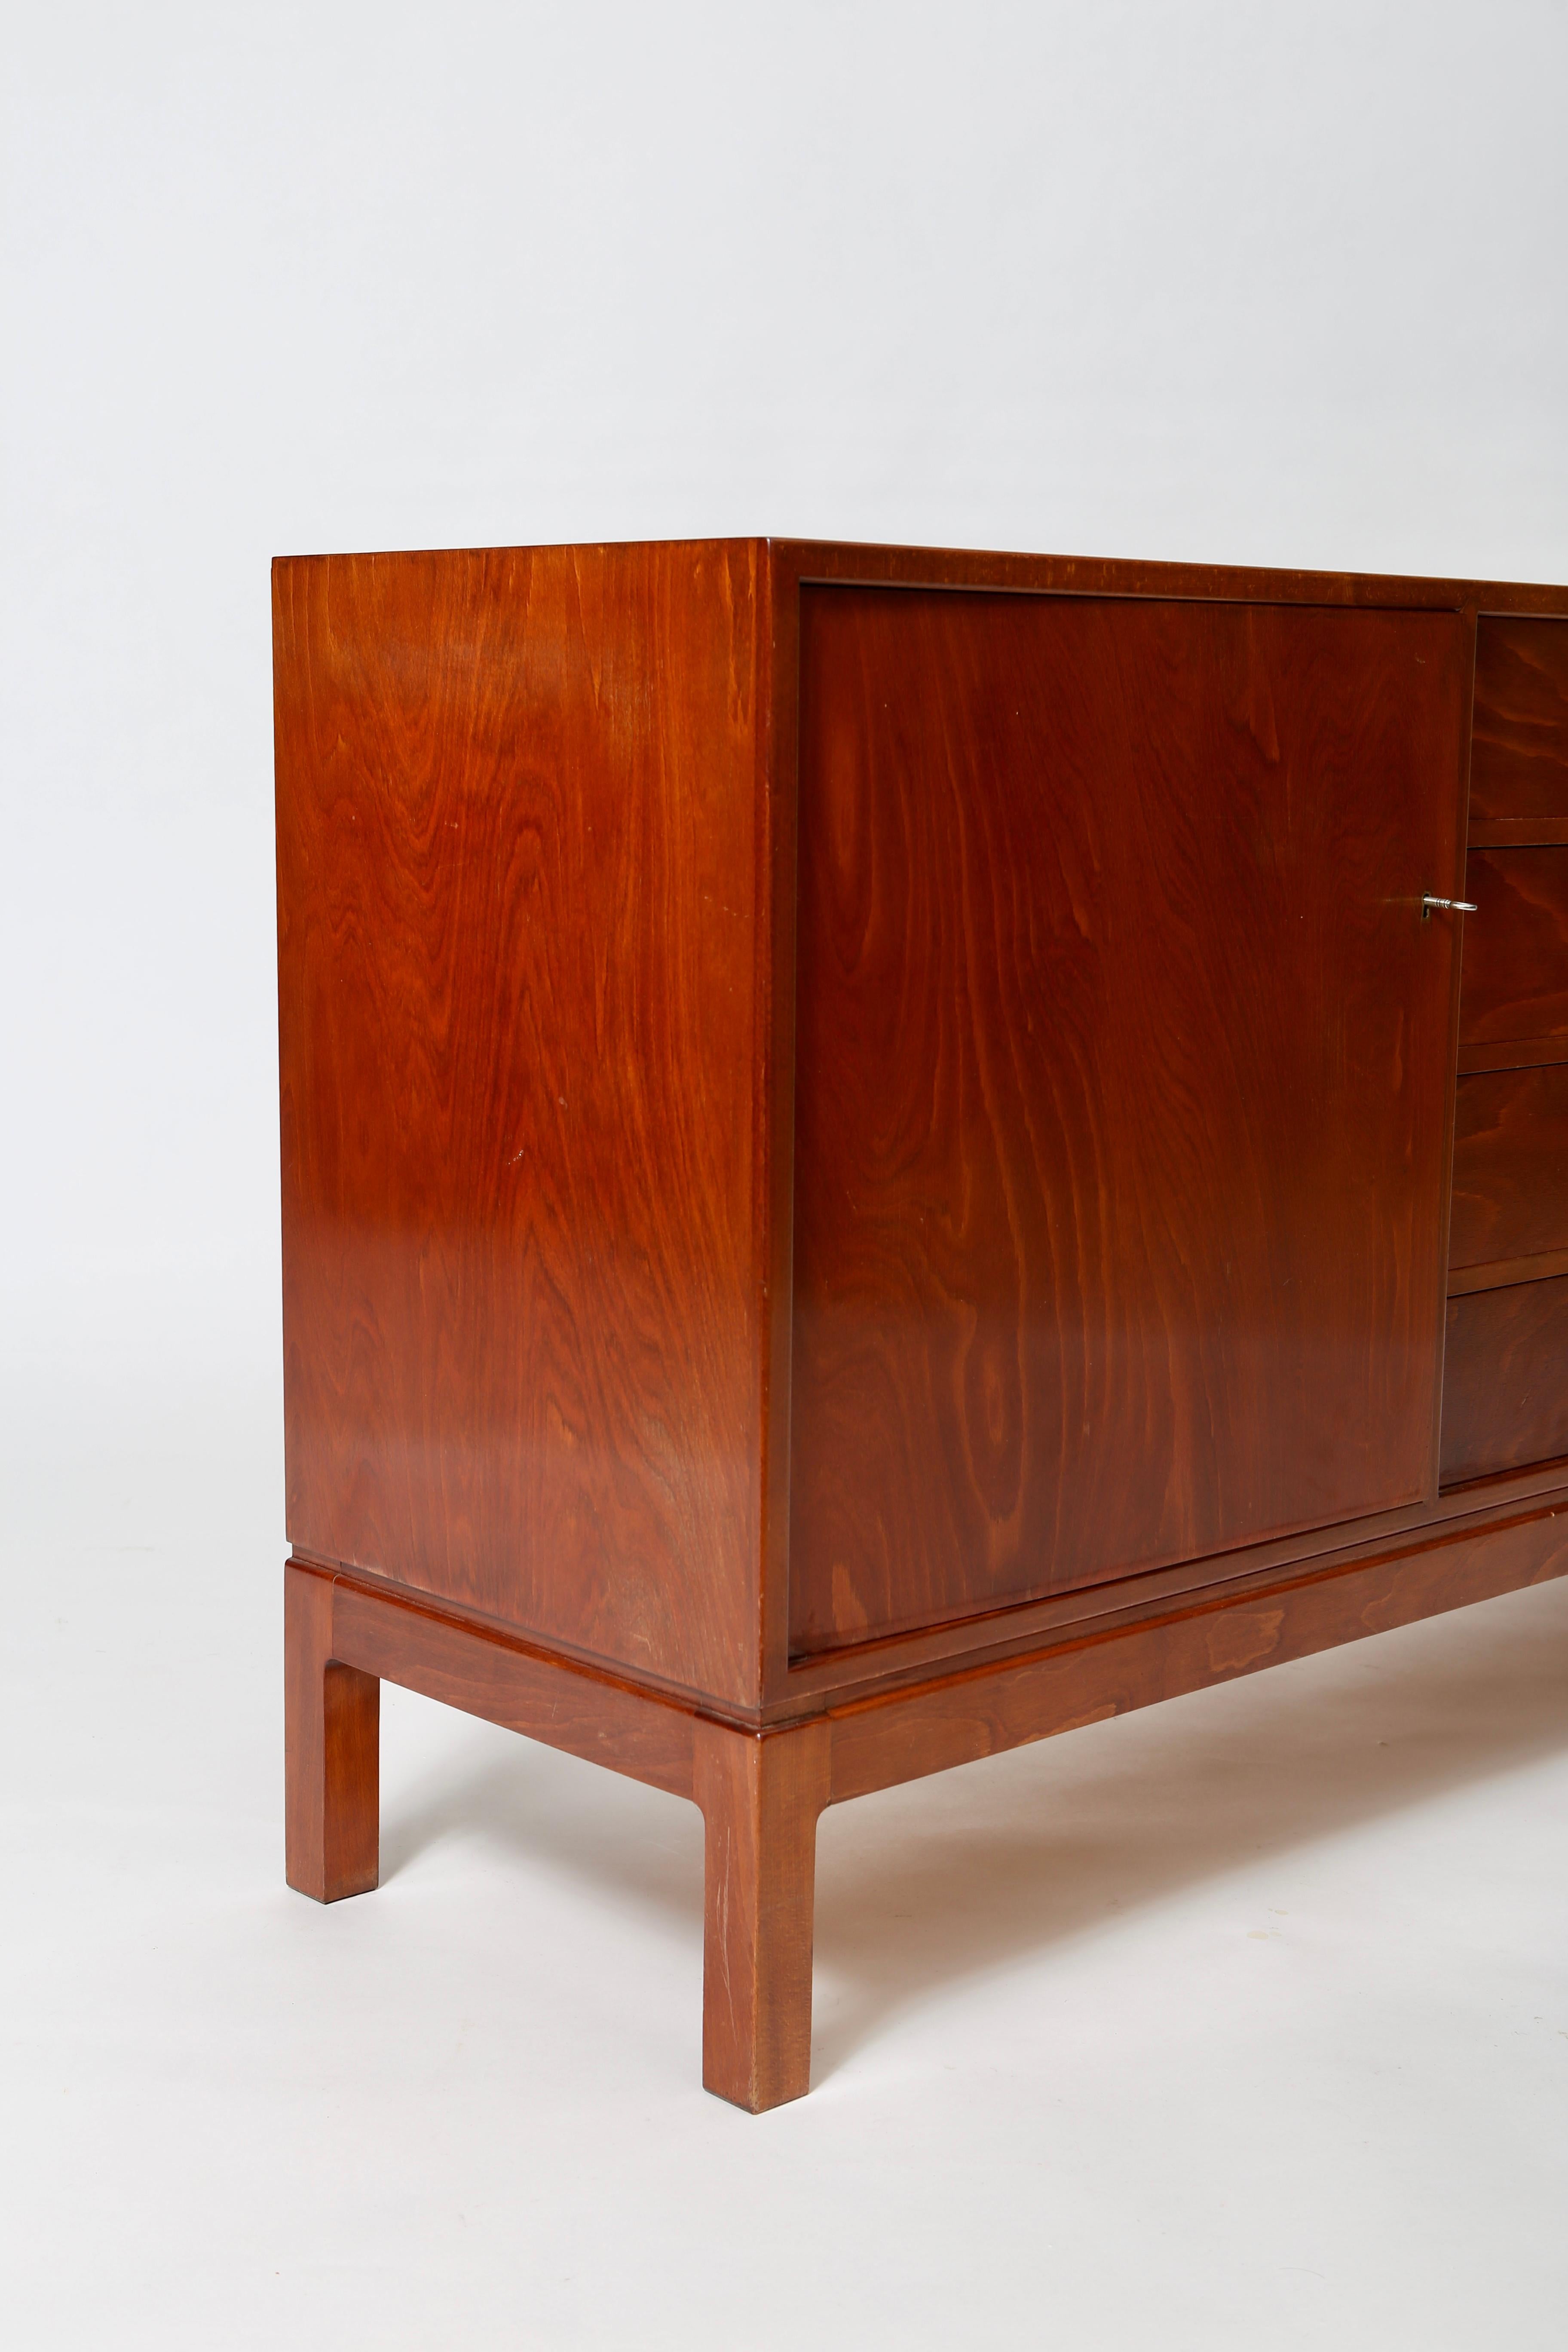 Stained Danish Art Deco 1930s Sideboard by Fritz Hansen For Sale